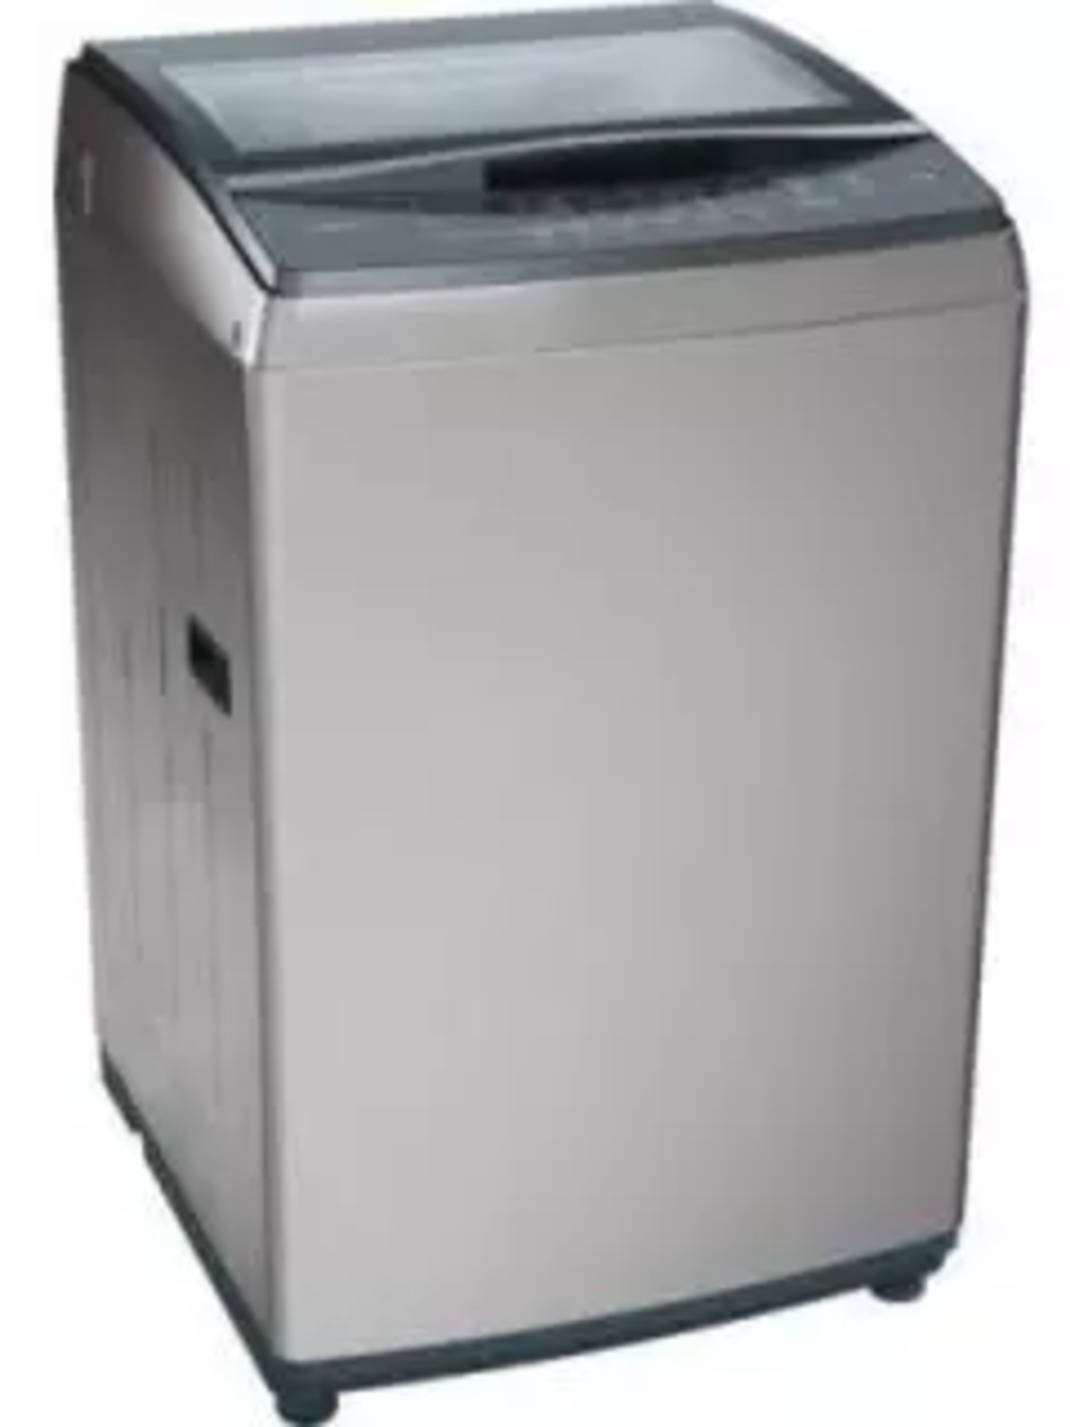 360° Bloomwash Pro 7.5kg Fully Automatic Top Load Washing Machine